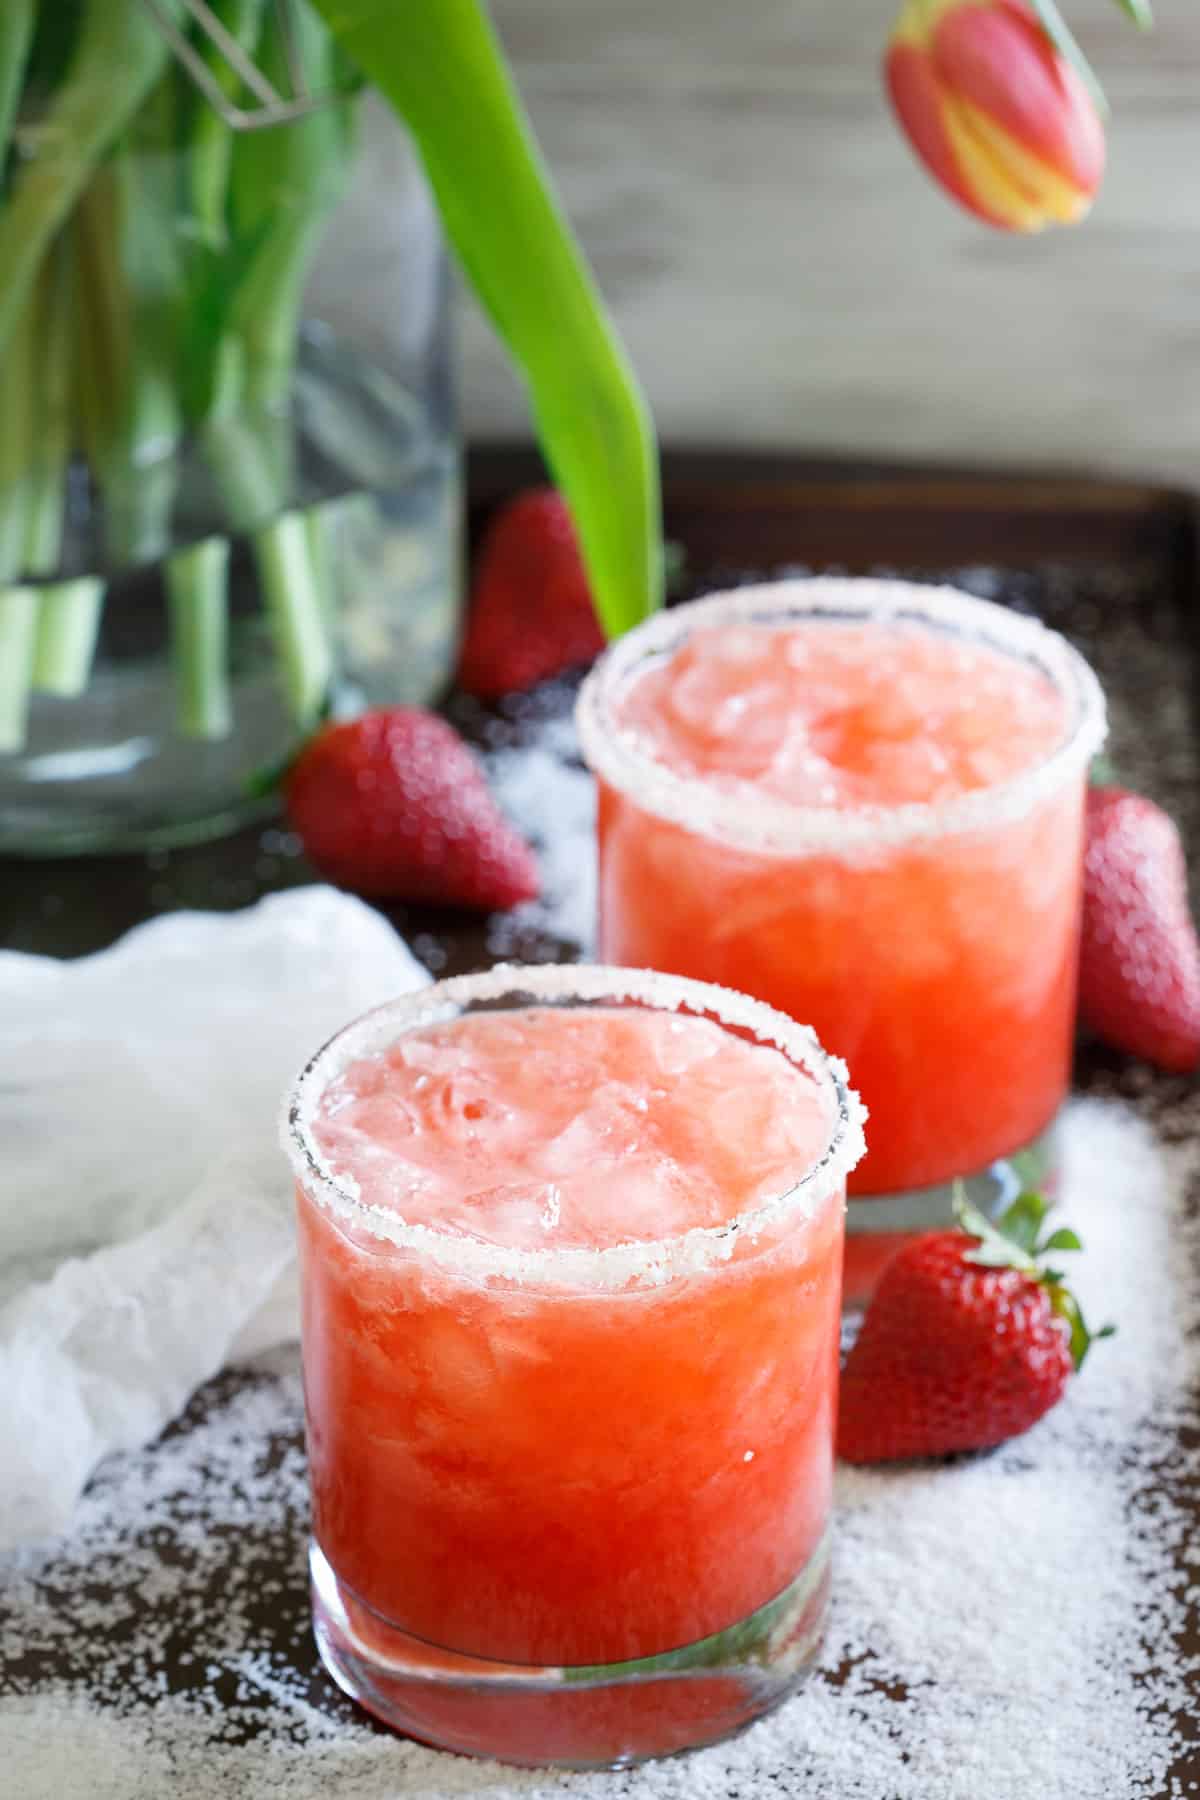 This salty dog cocktail recipe adds fresh strawberries for a spring twist to this classic drink. Perfect for Cinco de Mayo if tequila isn't your thing!